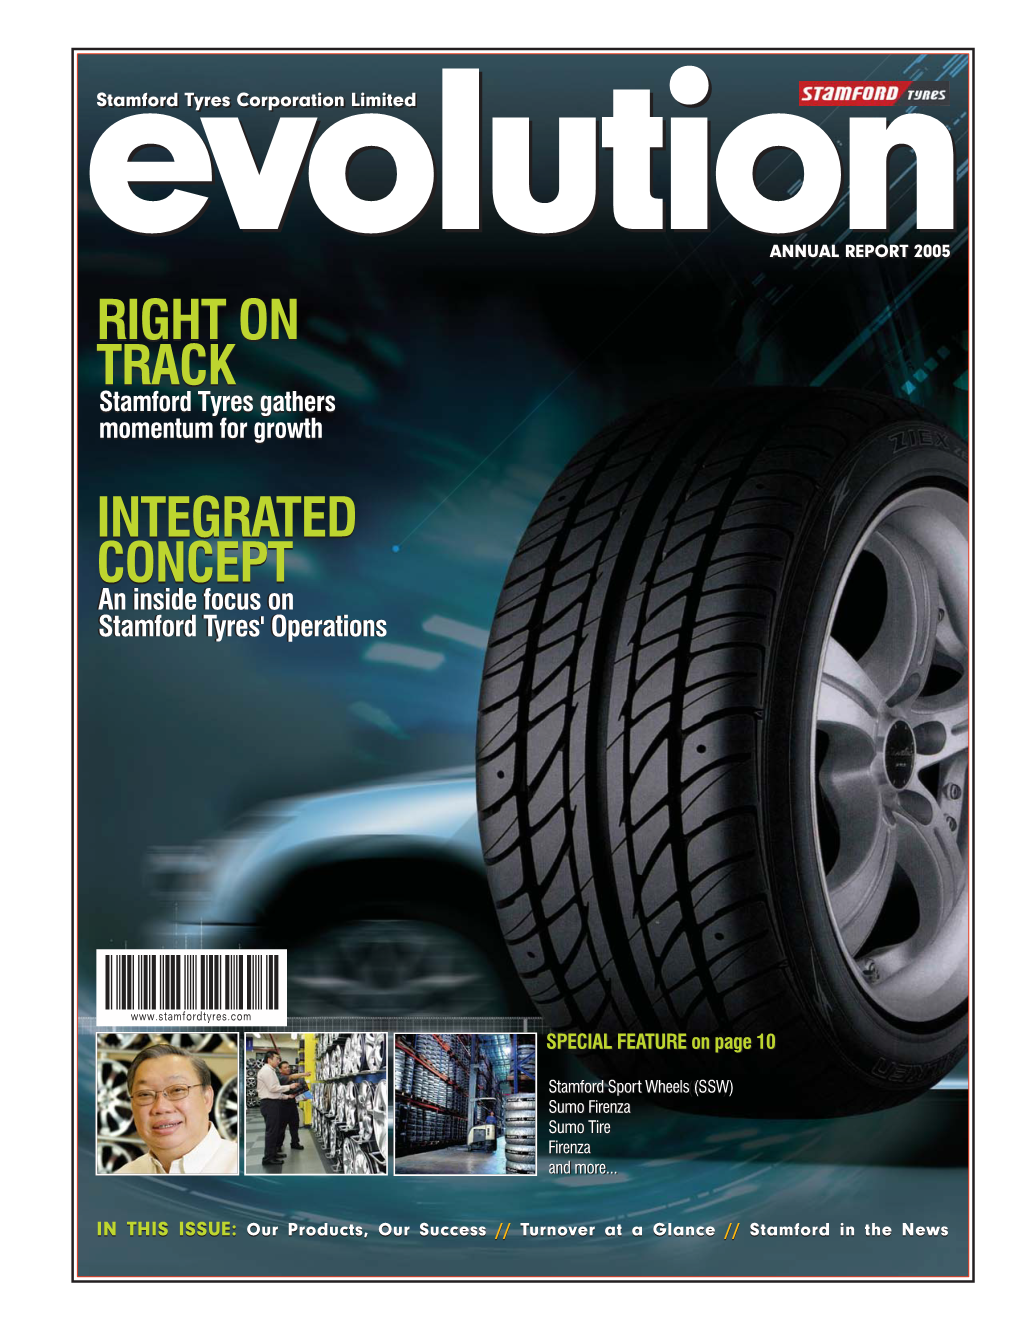 The Power of Tyre Contract Manufacturing